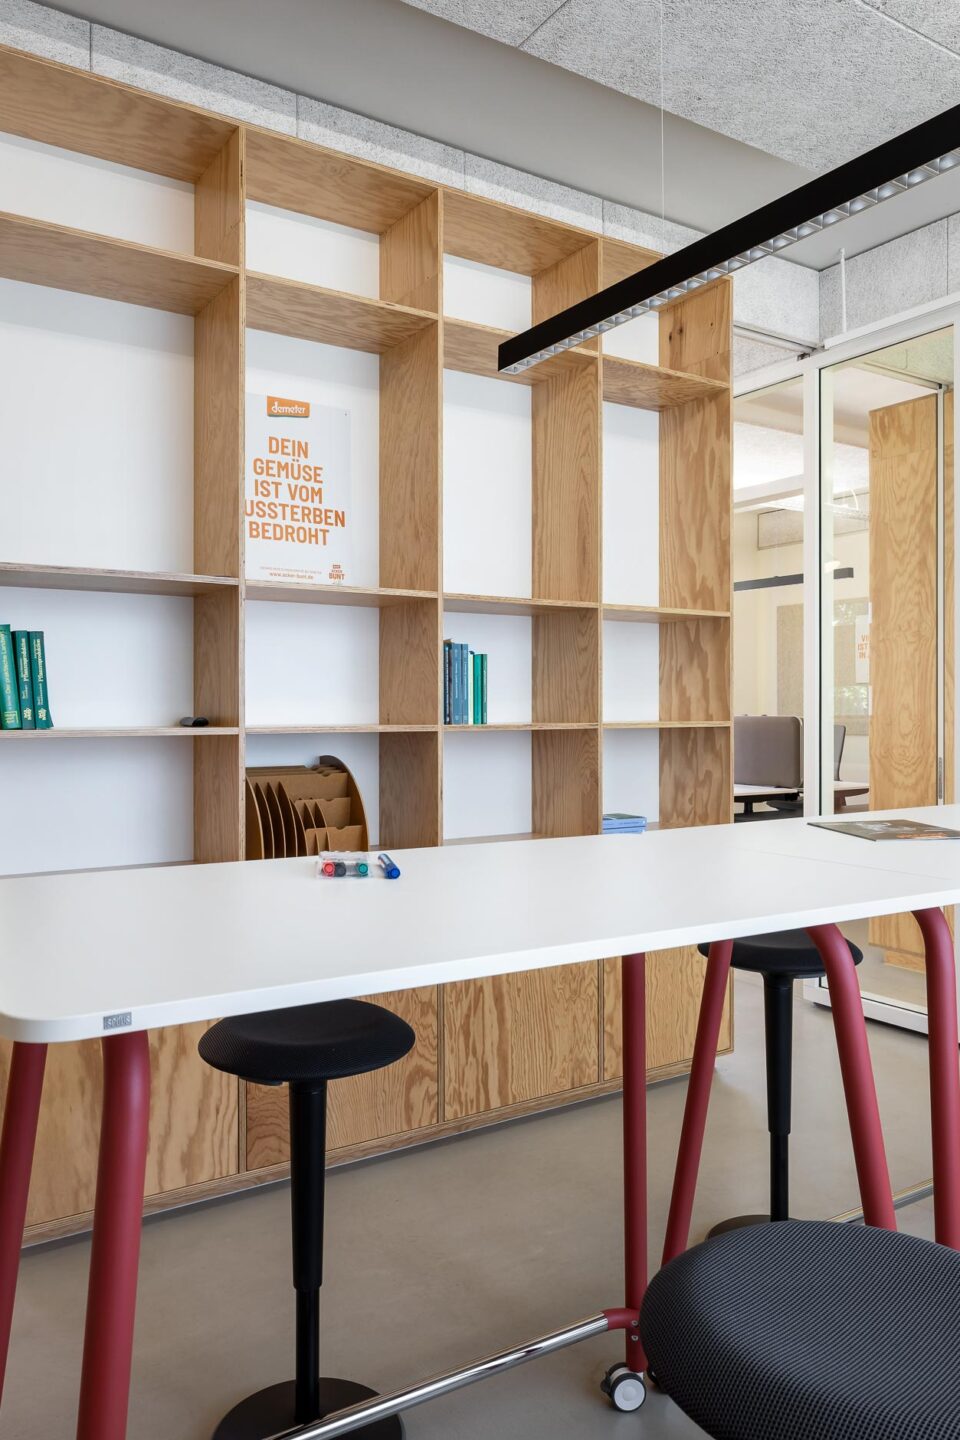 Brunner, Vitra, Steelcase │ office furniture by feco at Demeter in Berlin